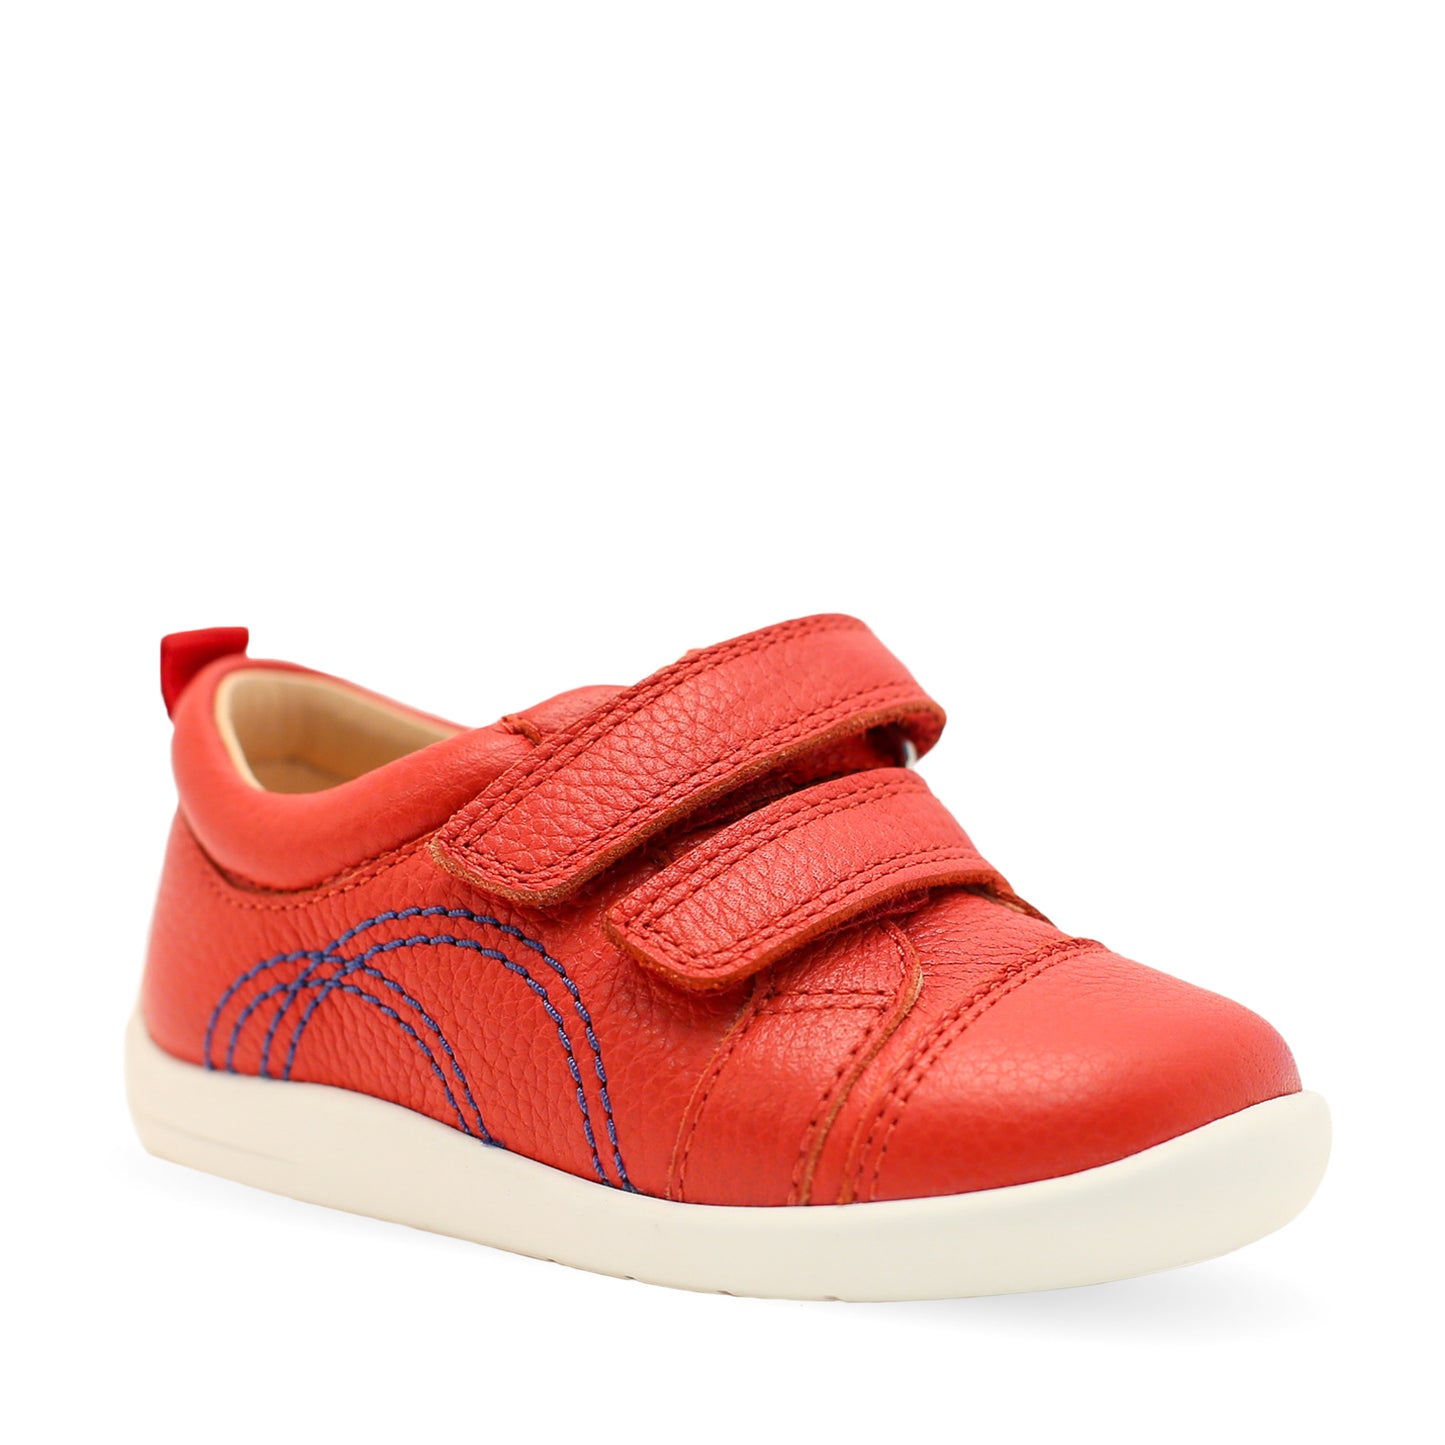 Tree House Red Leather First Walking Shoe